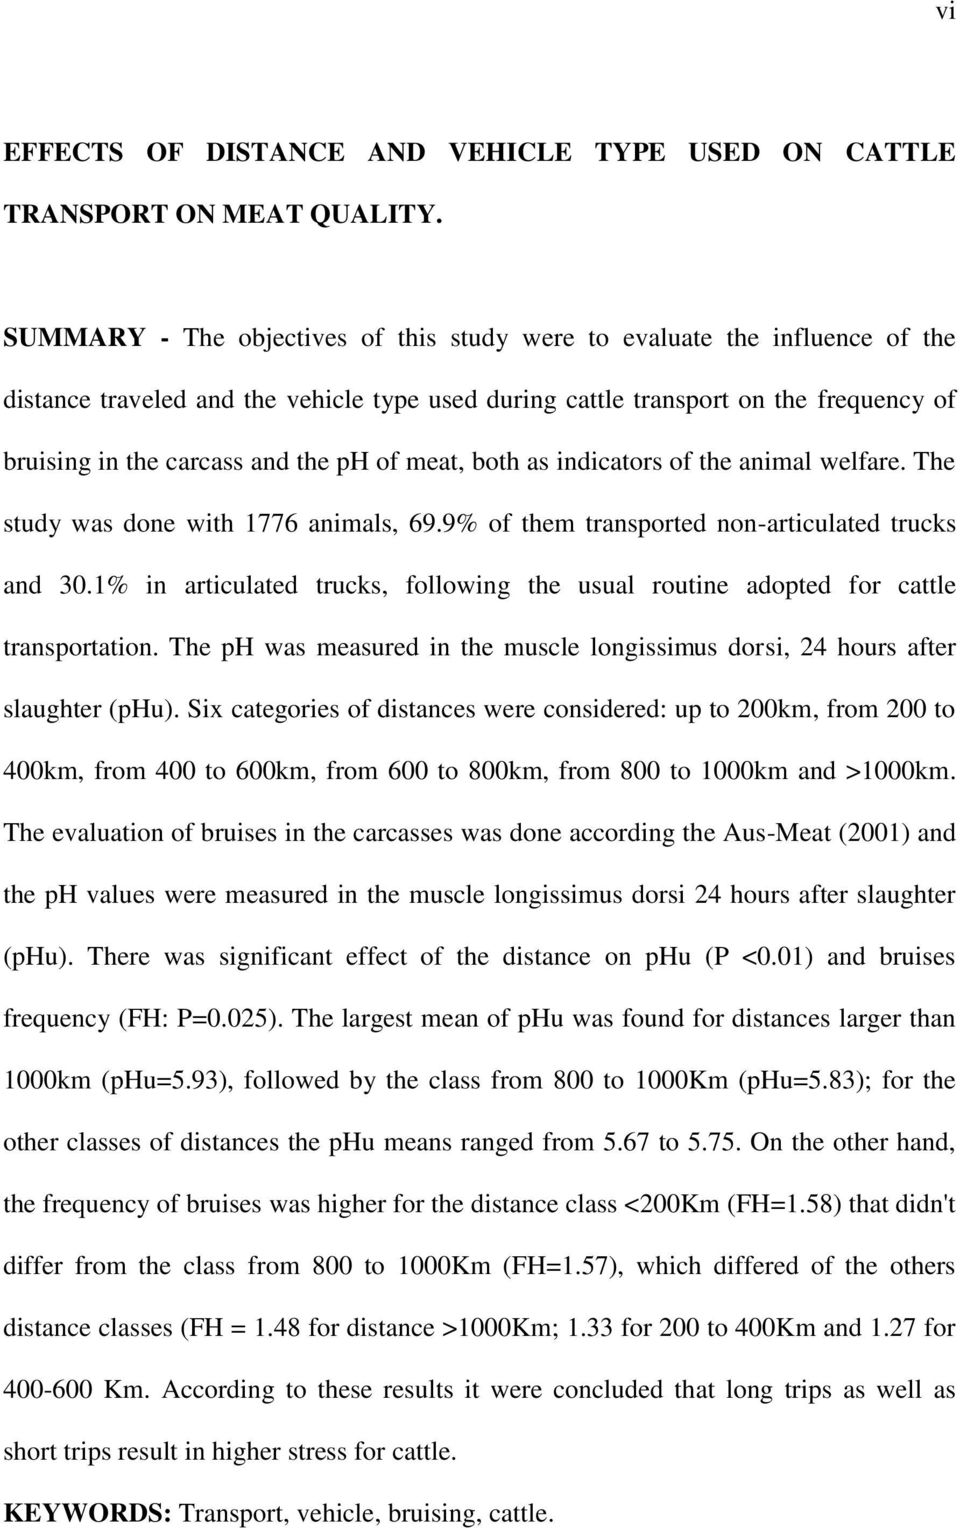 of meat, both as indicators of the animal welfare. The study was done with 1776 animals, 69.9% of them transported non-articulated trucks and 30.